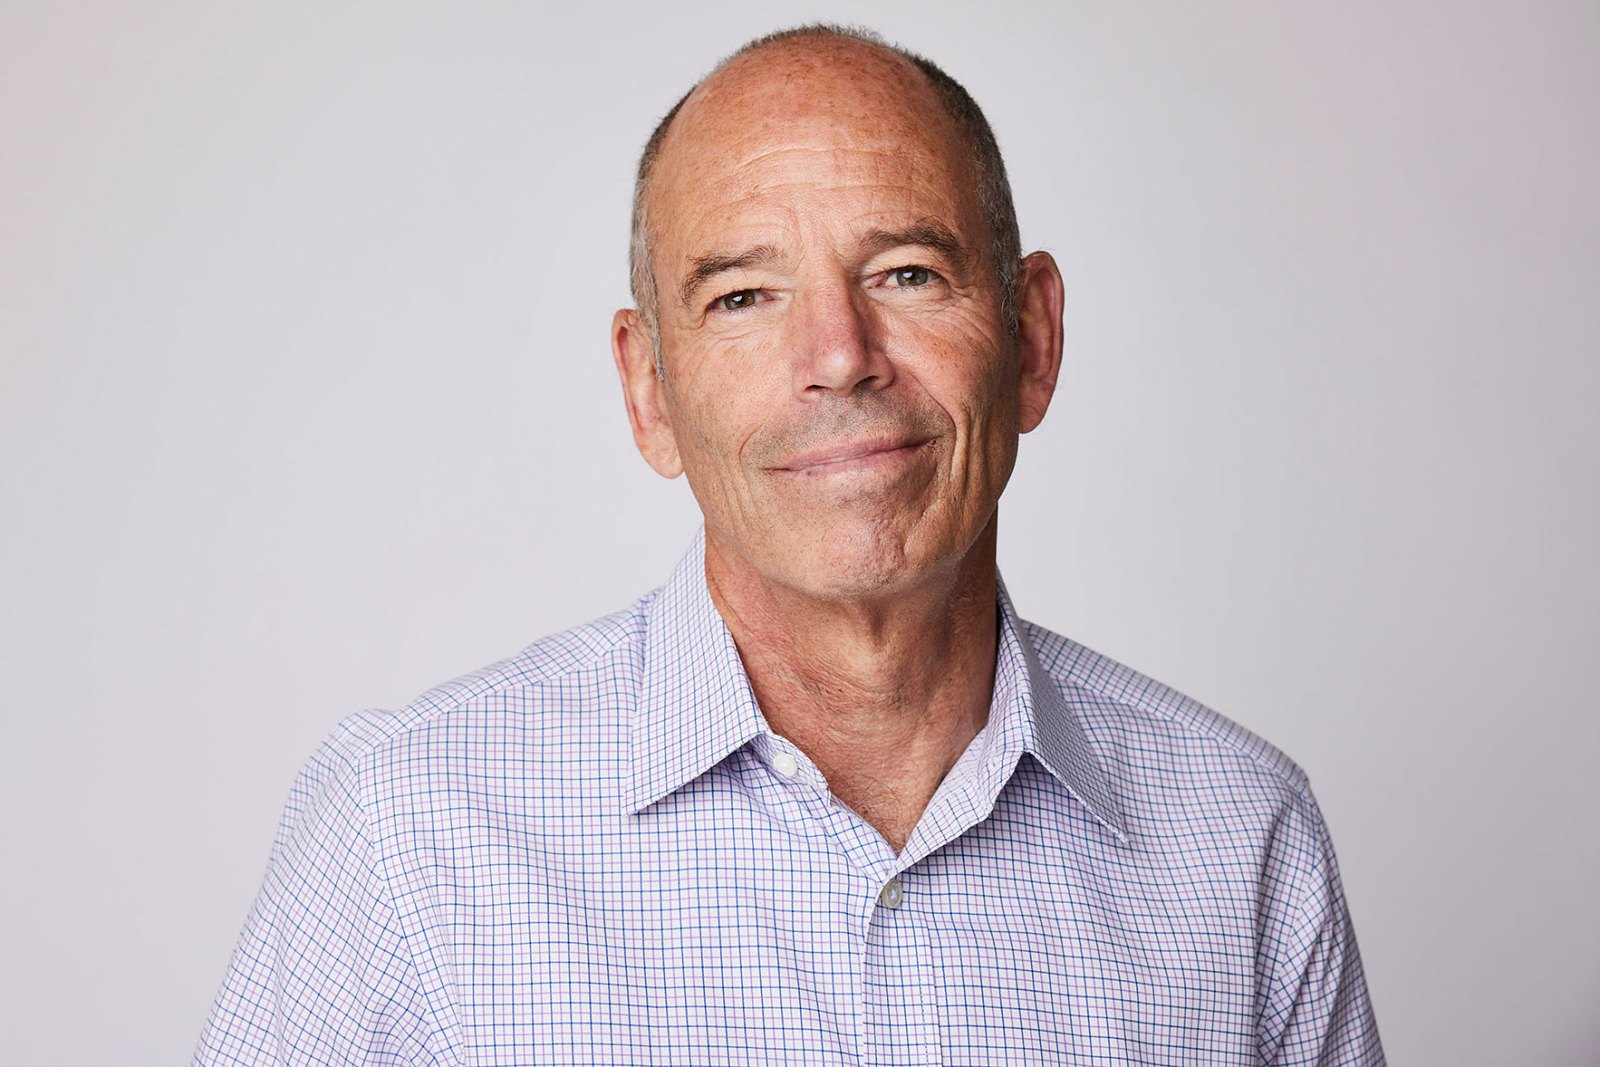 Netflix's Marc Randolph Shares Advice in 'That Will Never Work' Us Weekly